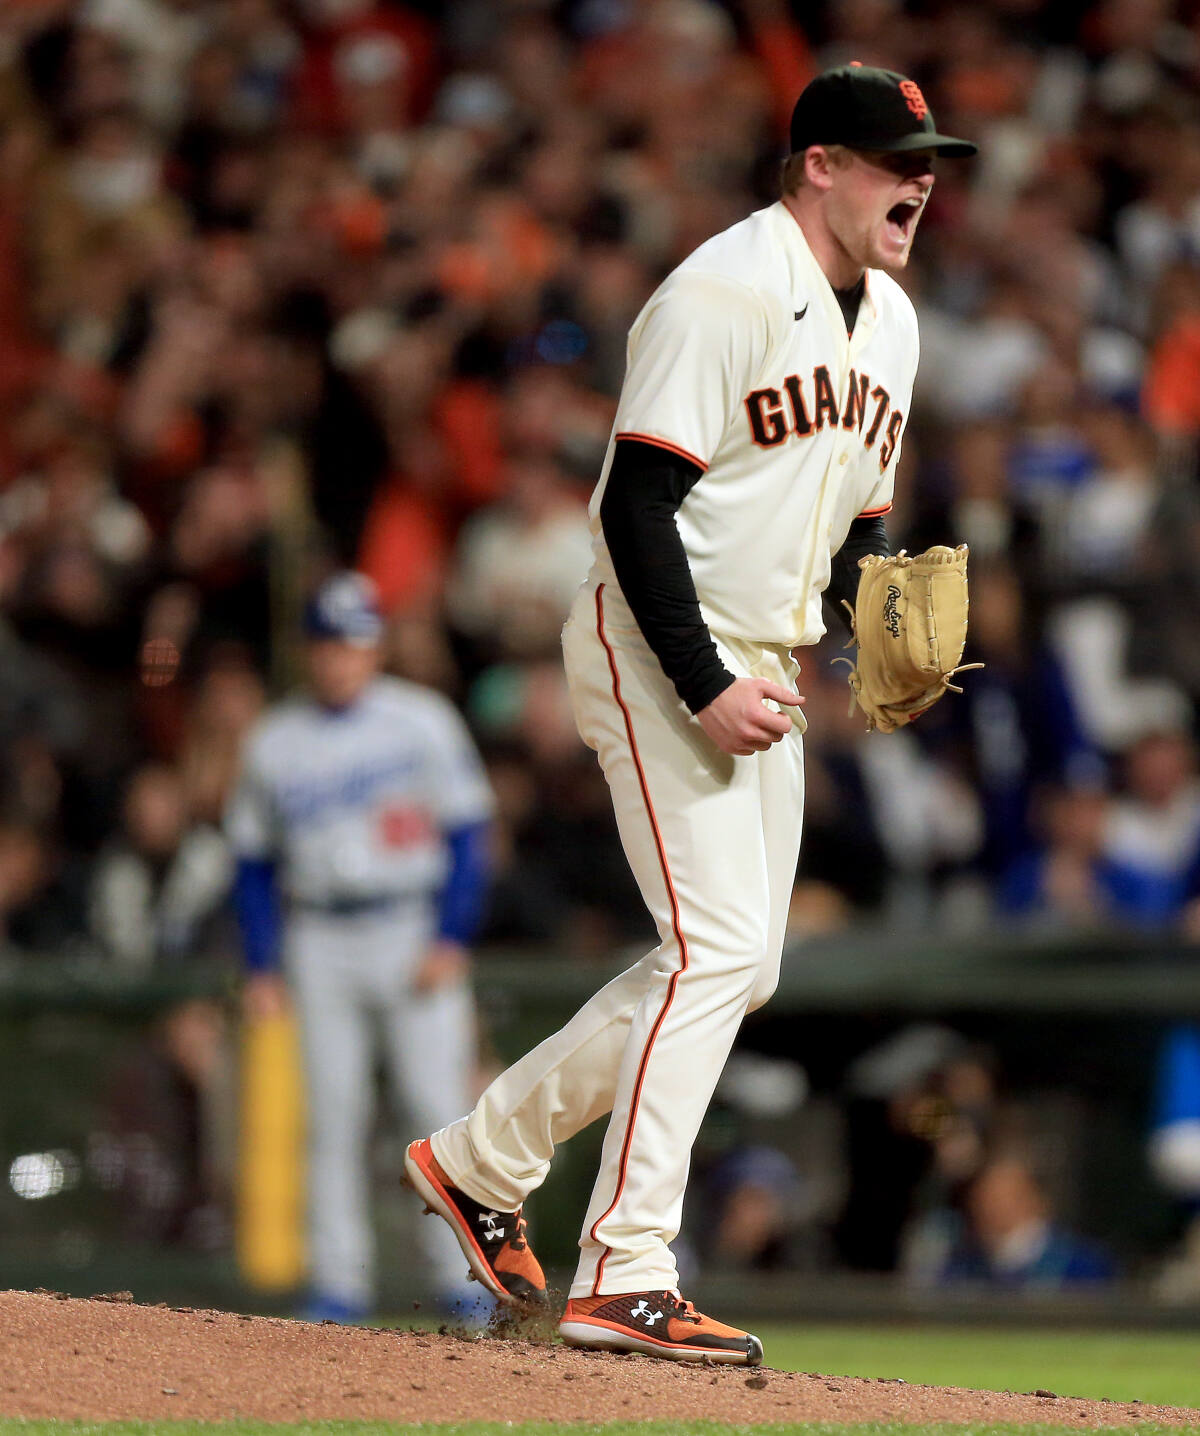 Rocklin's Logan Webb set to pitch for Giants in game 5 against Dodgers